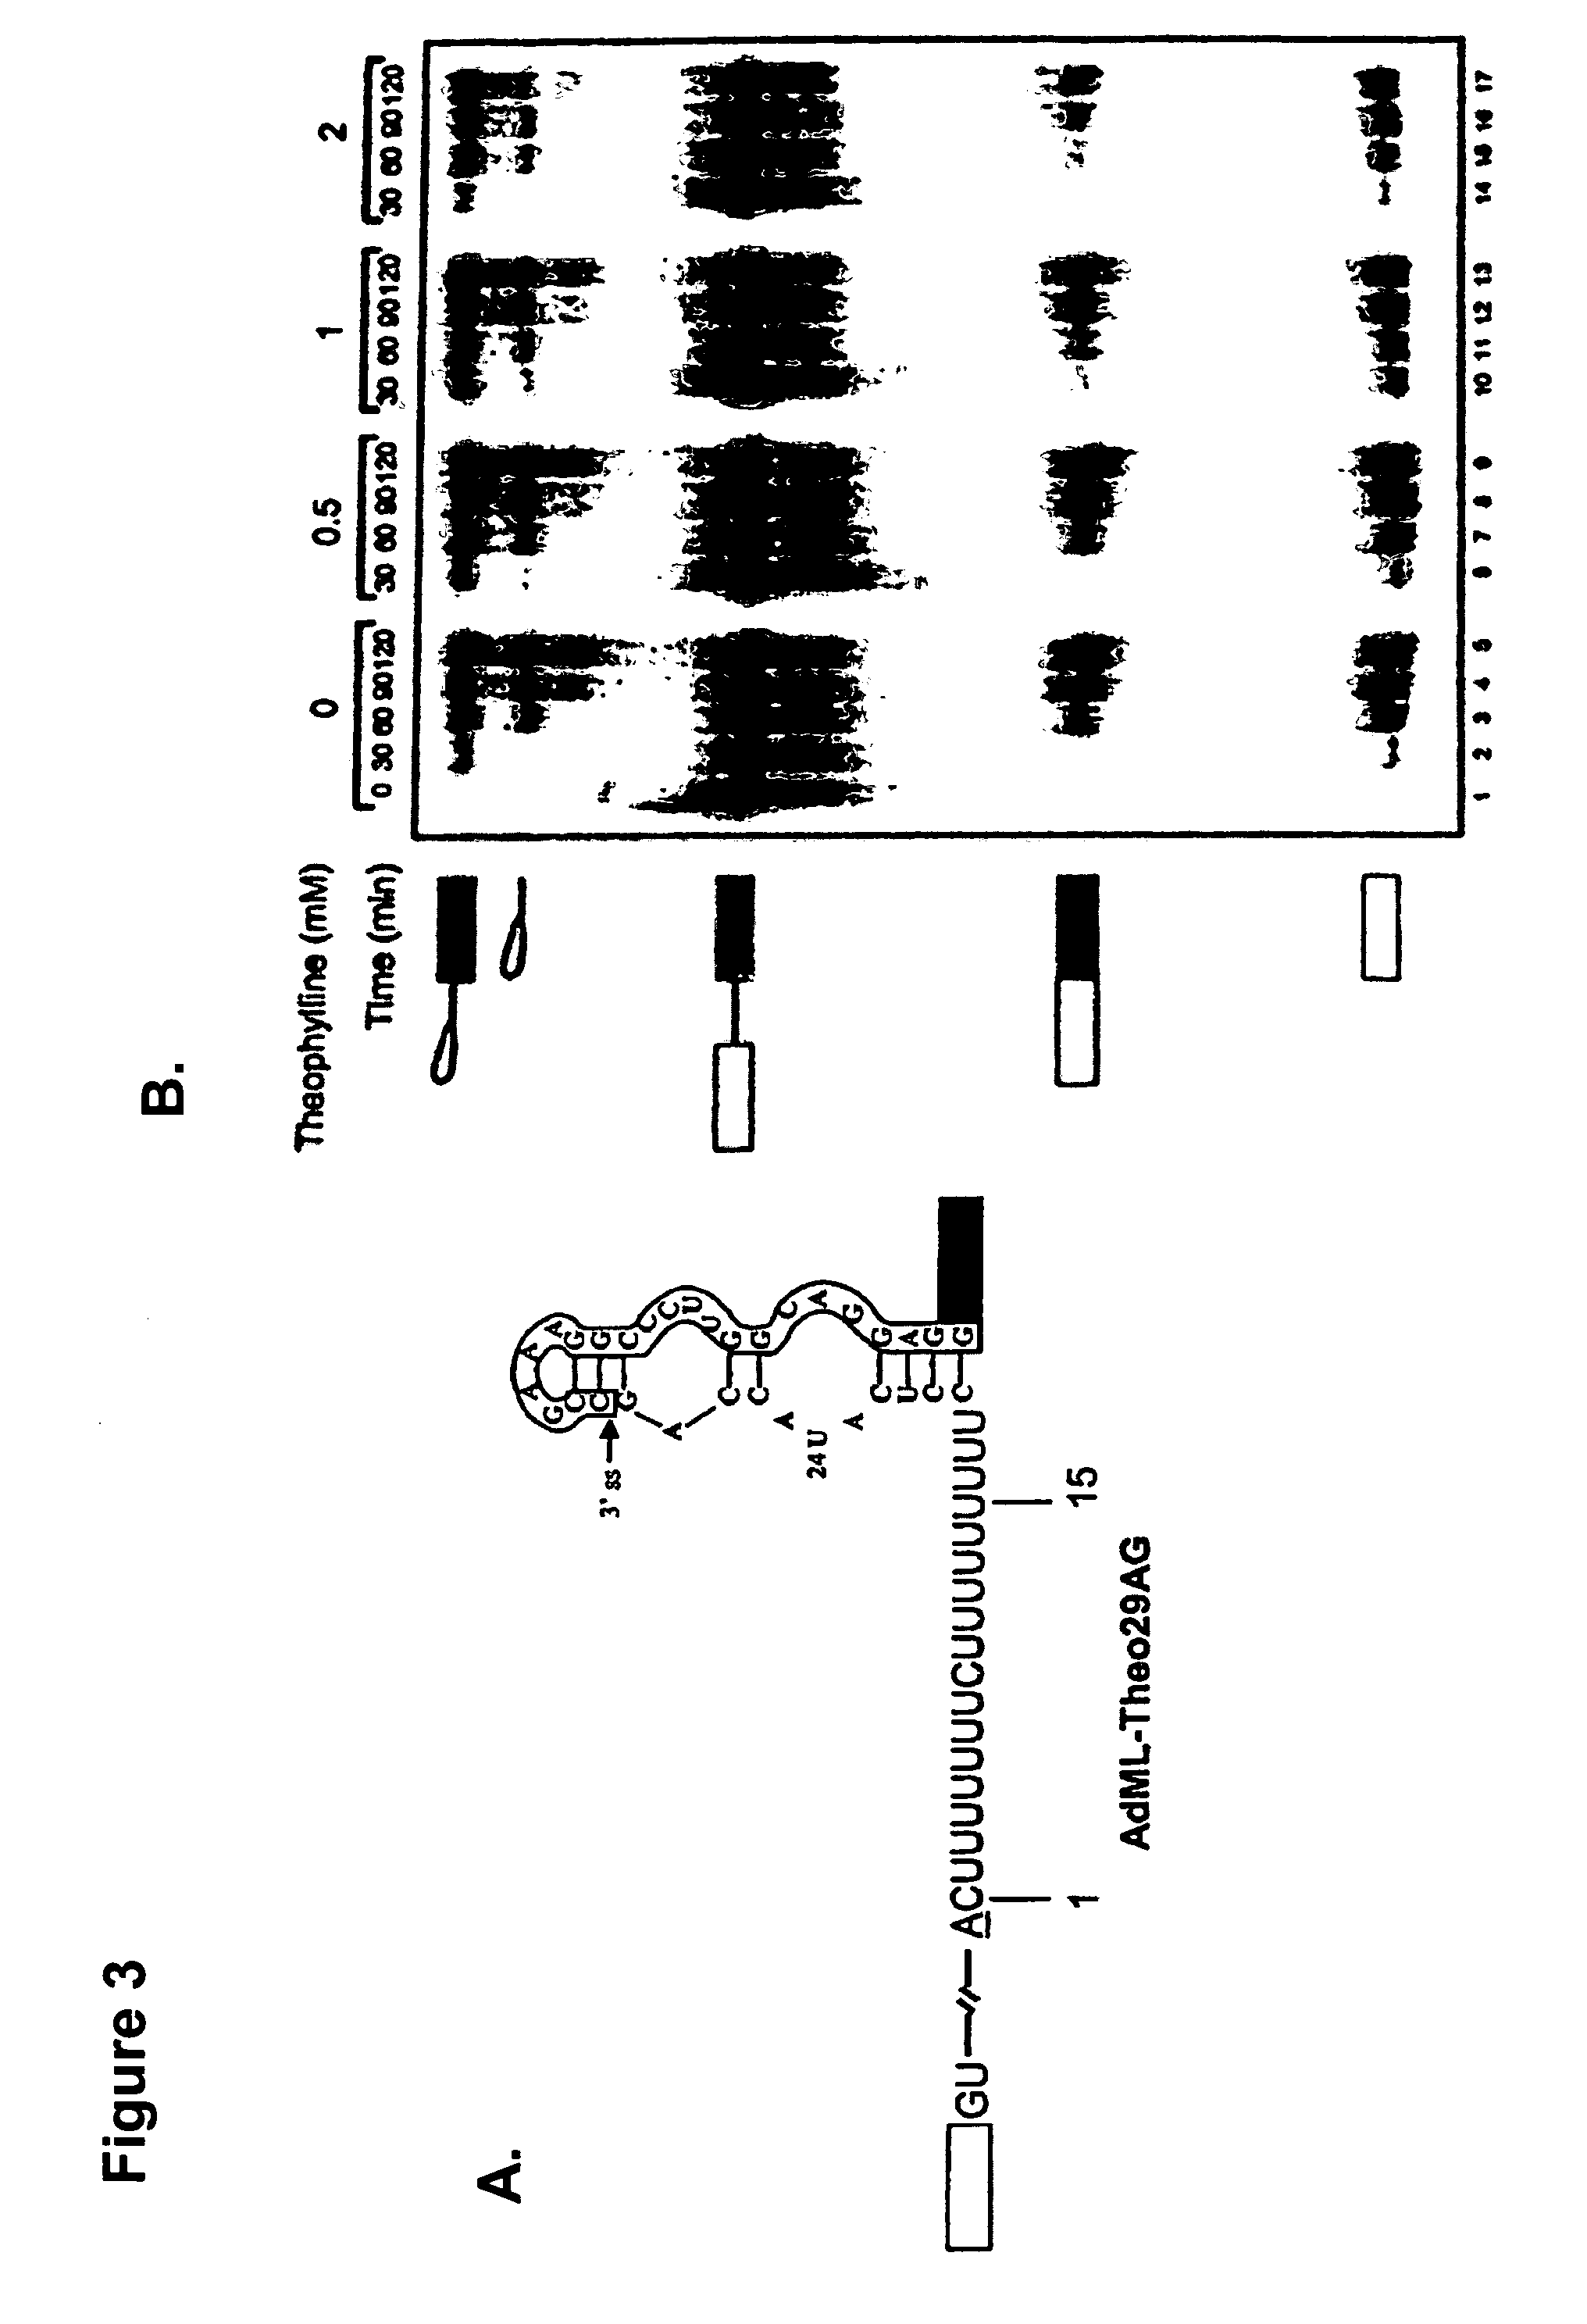 Artificial riboswitch for controlling pre-mRNA splicing